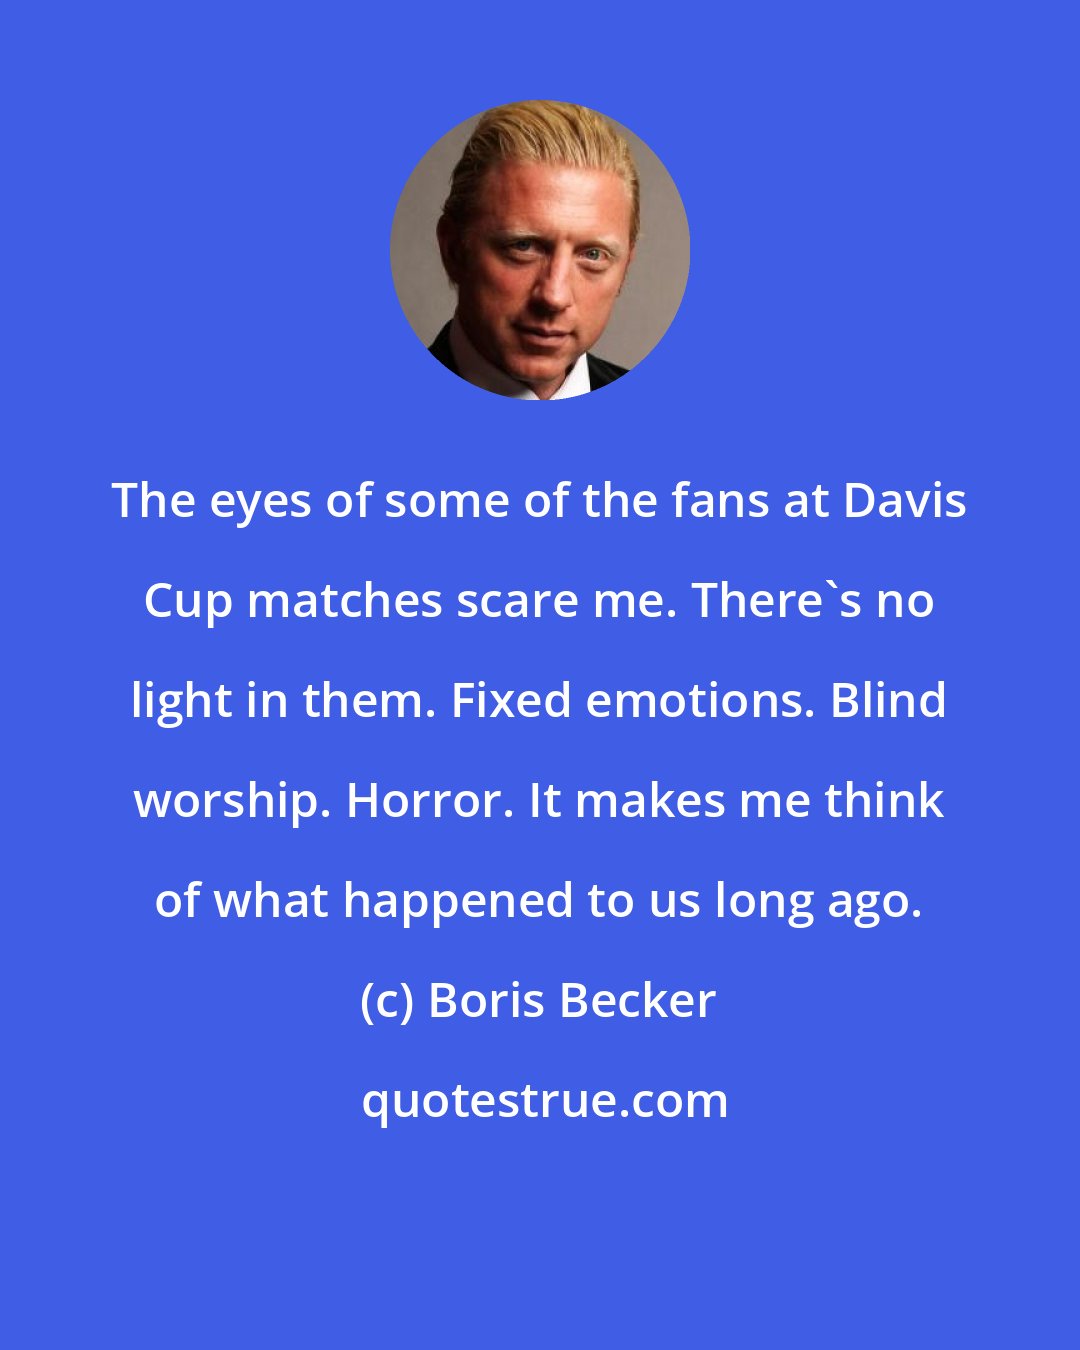 Boris Becker: The eyes of some of the fans at Davis Cup matches scare me. There's no light in them. Fixed emotions. Blind worship. Horror. It makes me think of what happened to us long ago.